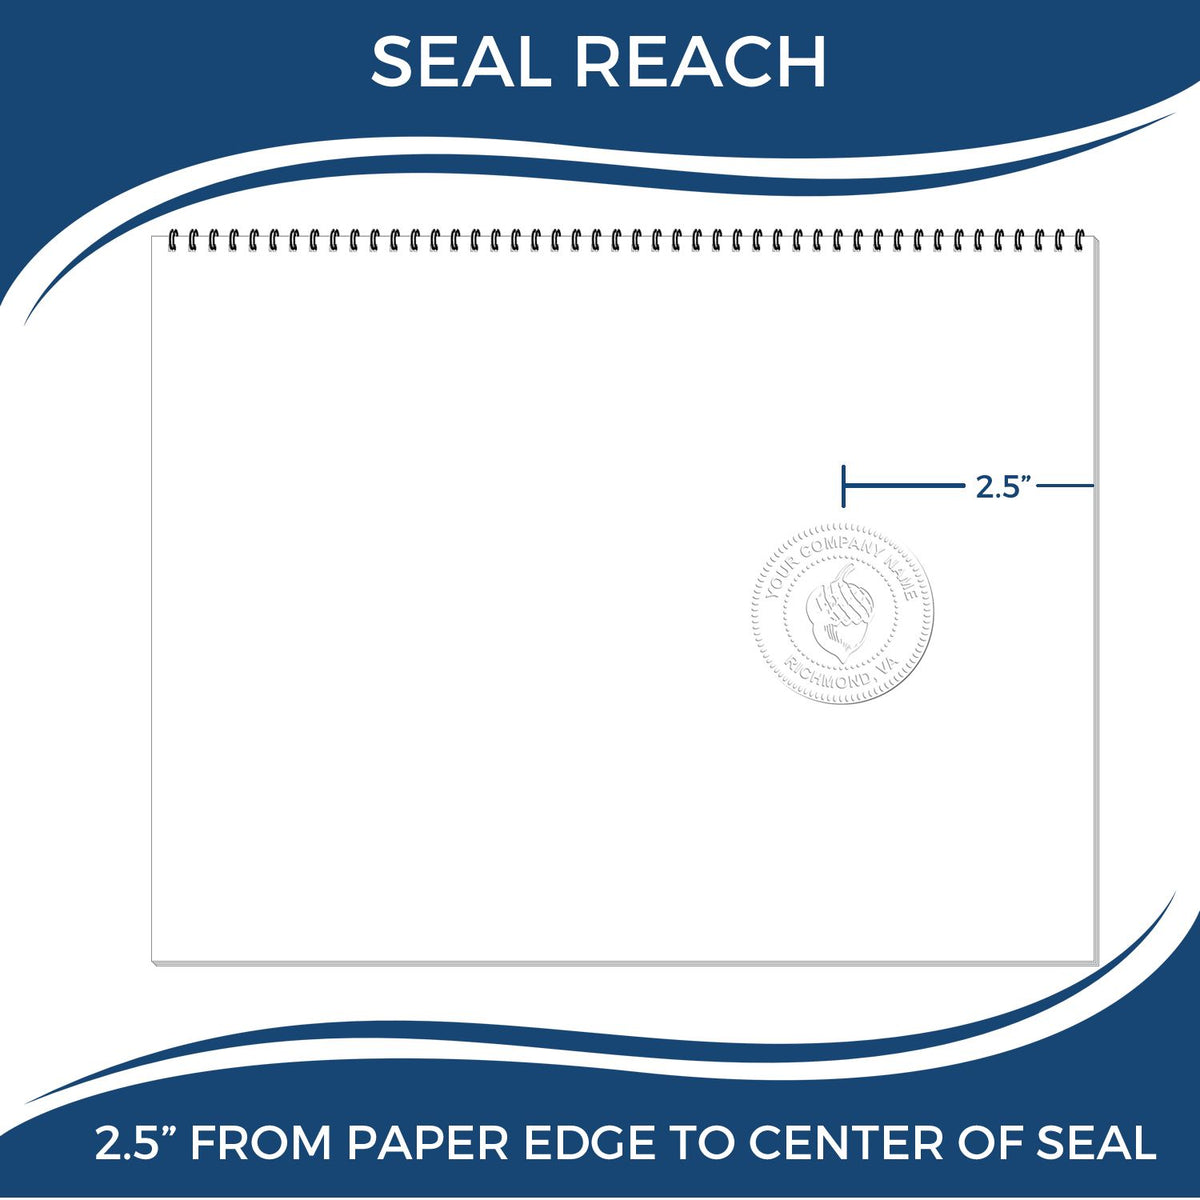 An infographic showing the seal reach which is represented by a ruler and a miniature seal image of the State of Louisiana Long Reach Architectural Embossing Seal